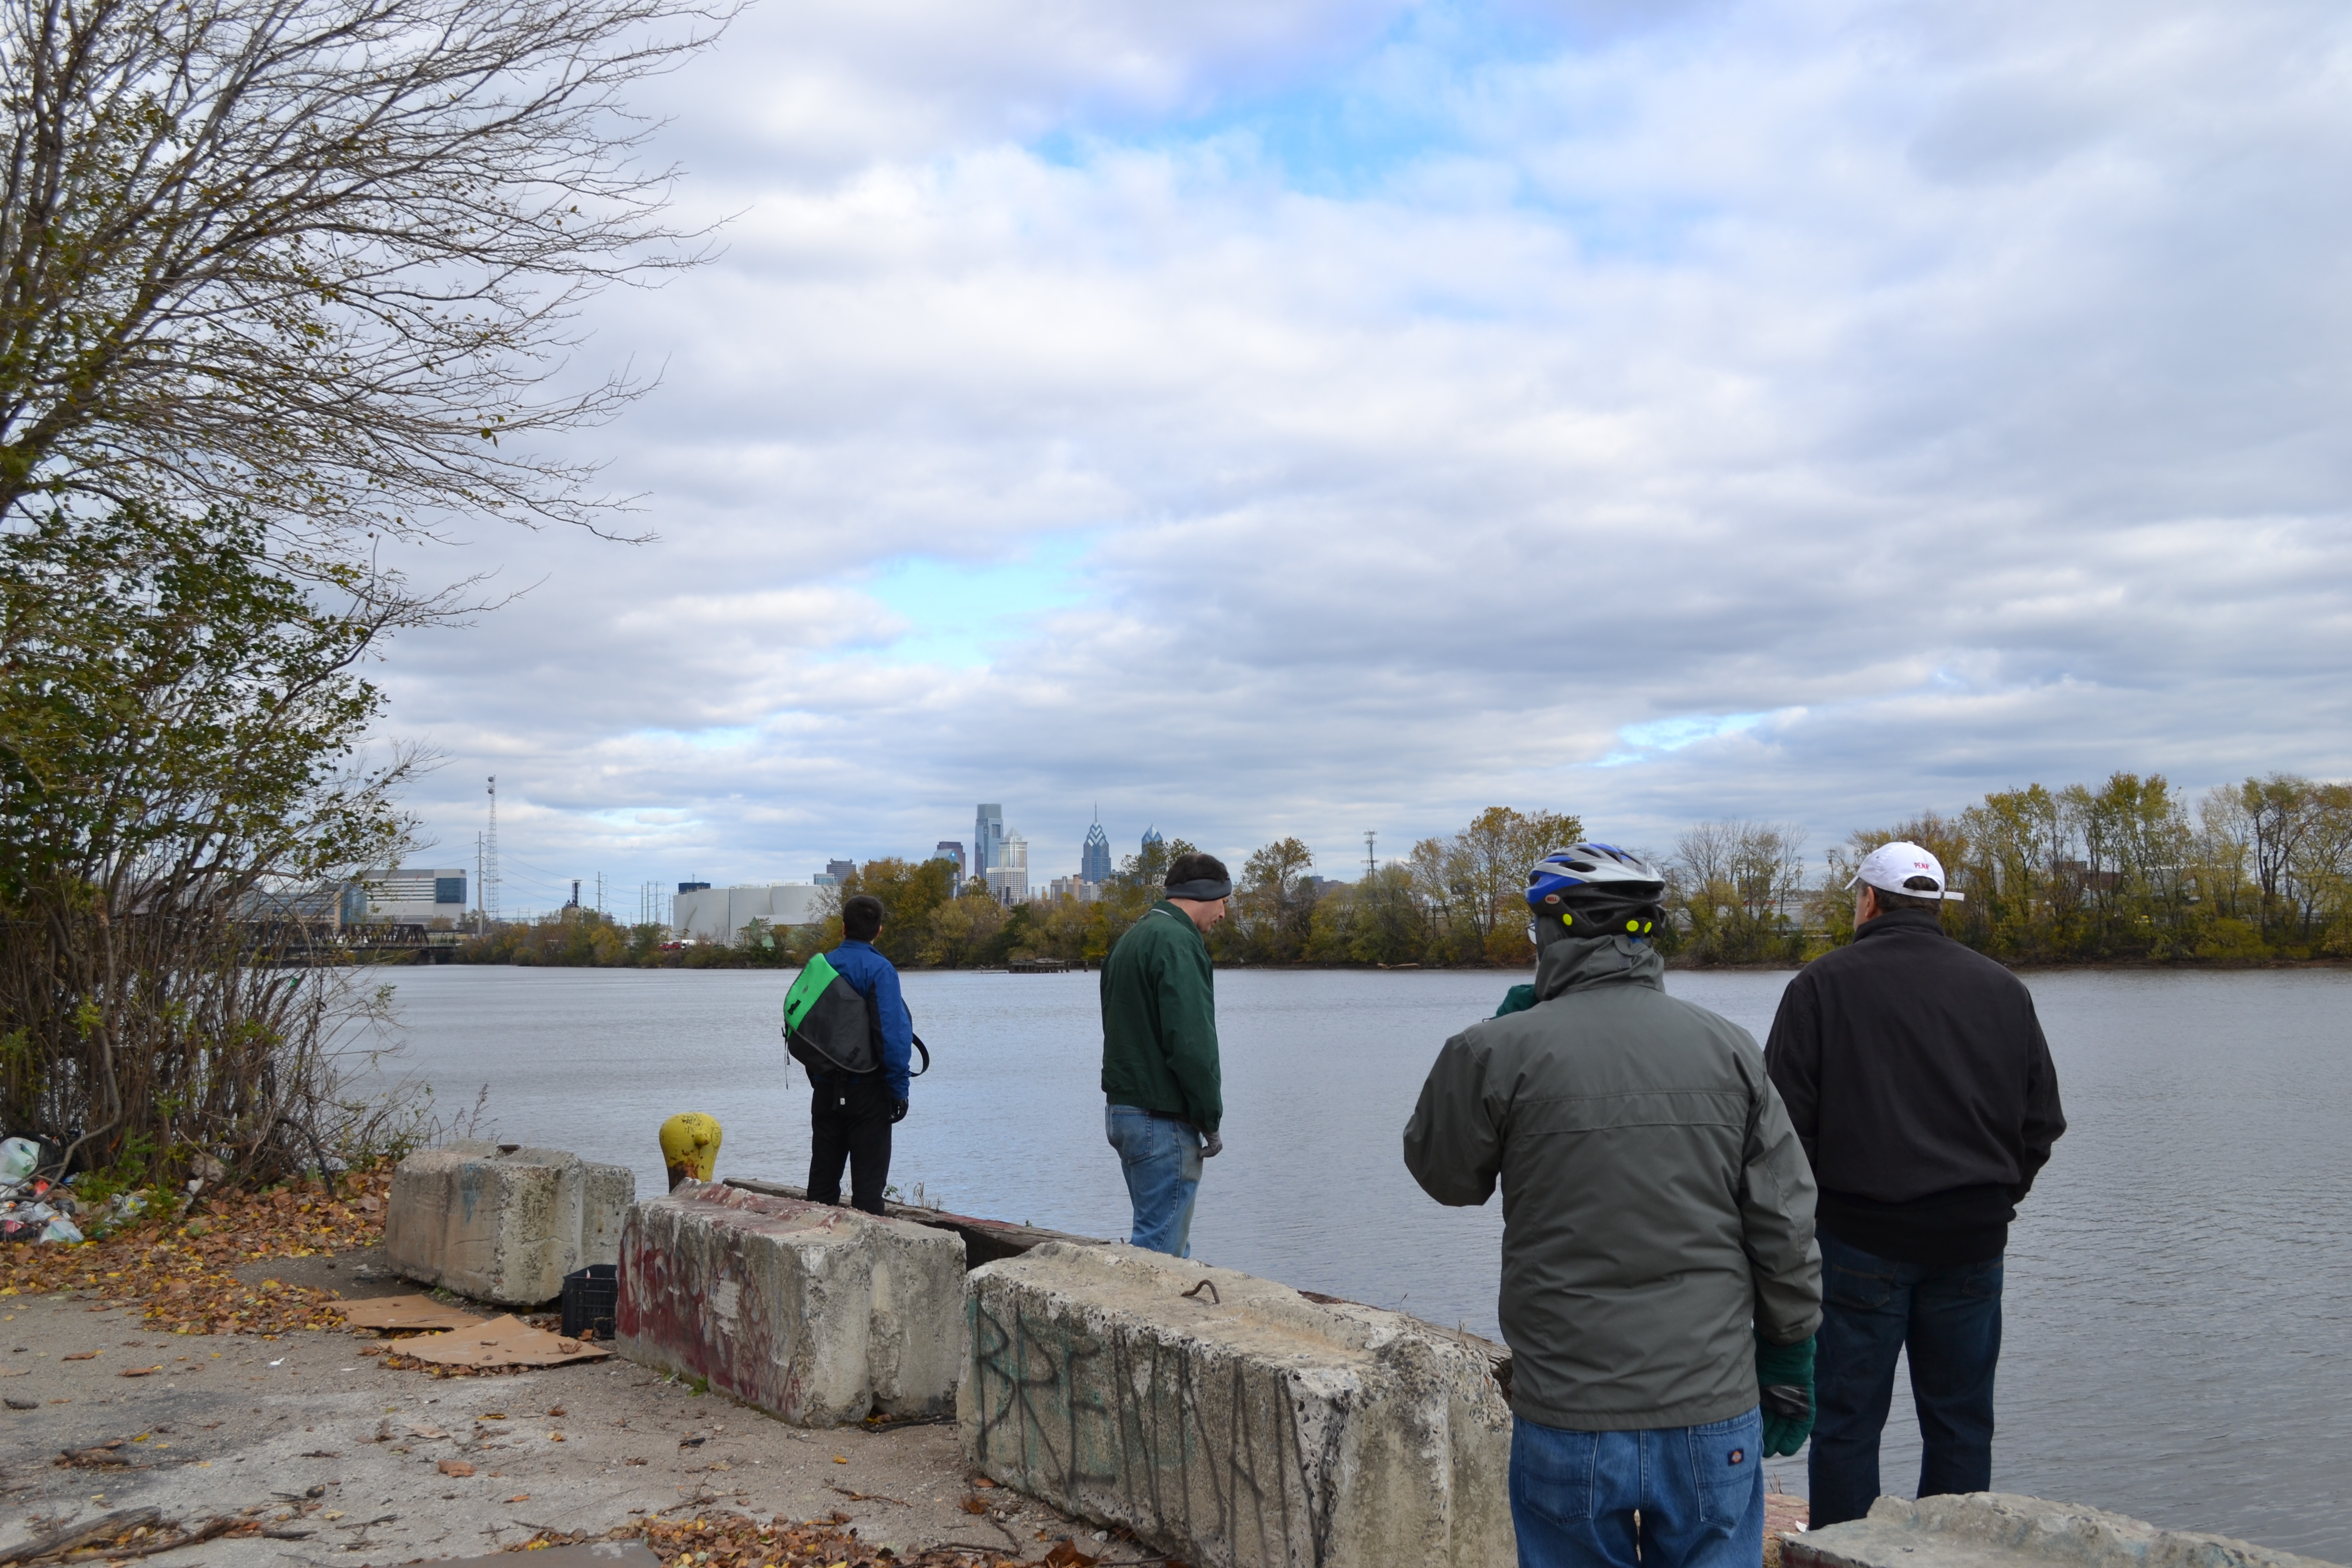 Tour attendees viewed the Center City skyline from the southern half of Bartram's Mile